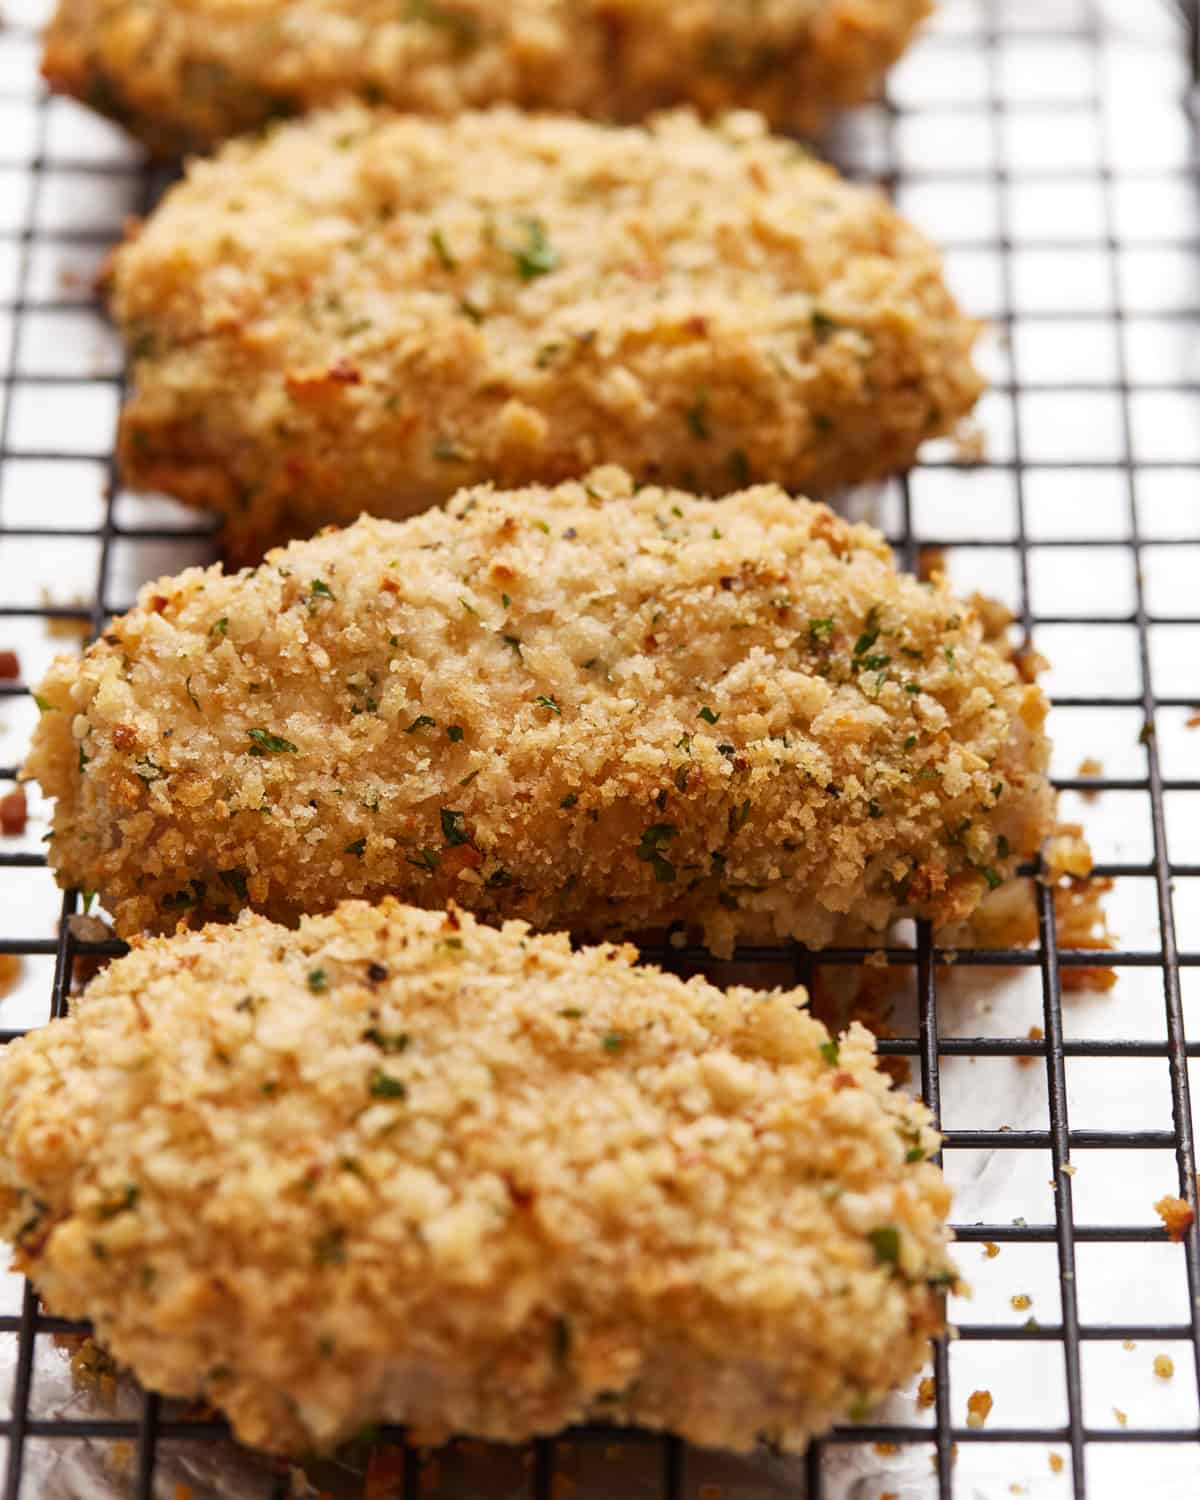 baked pork chops with breading on a cooling rack.